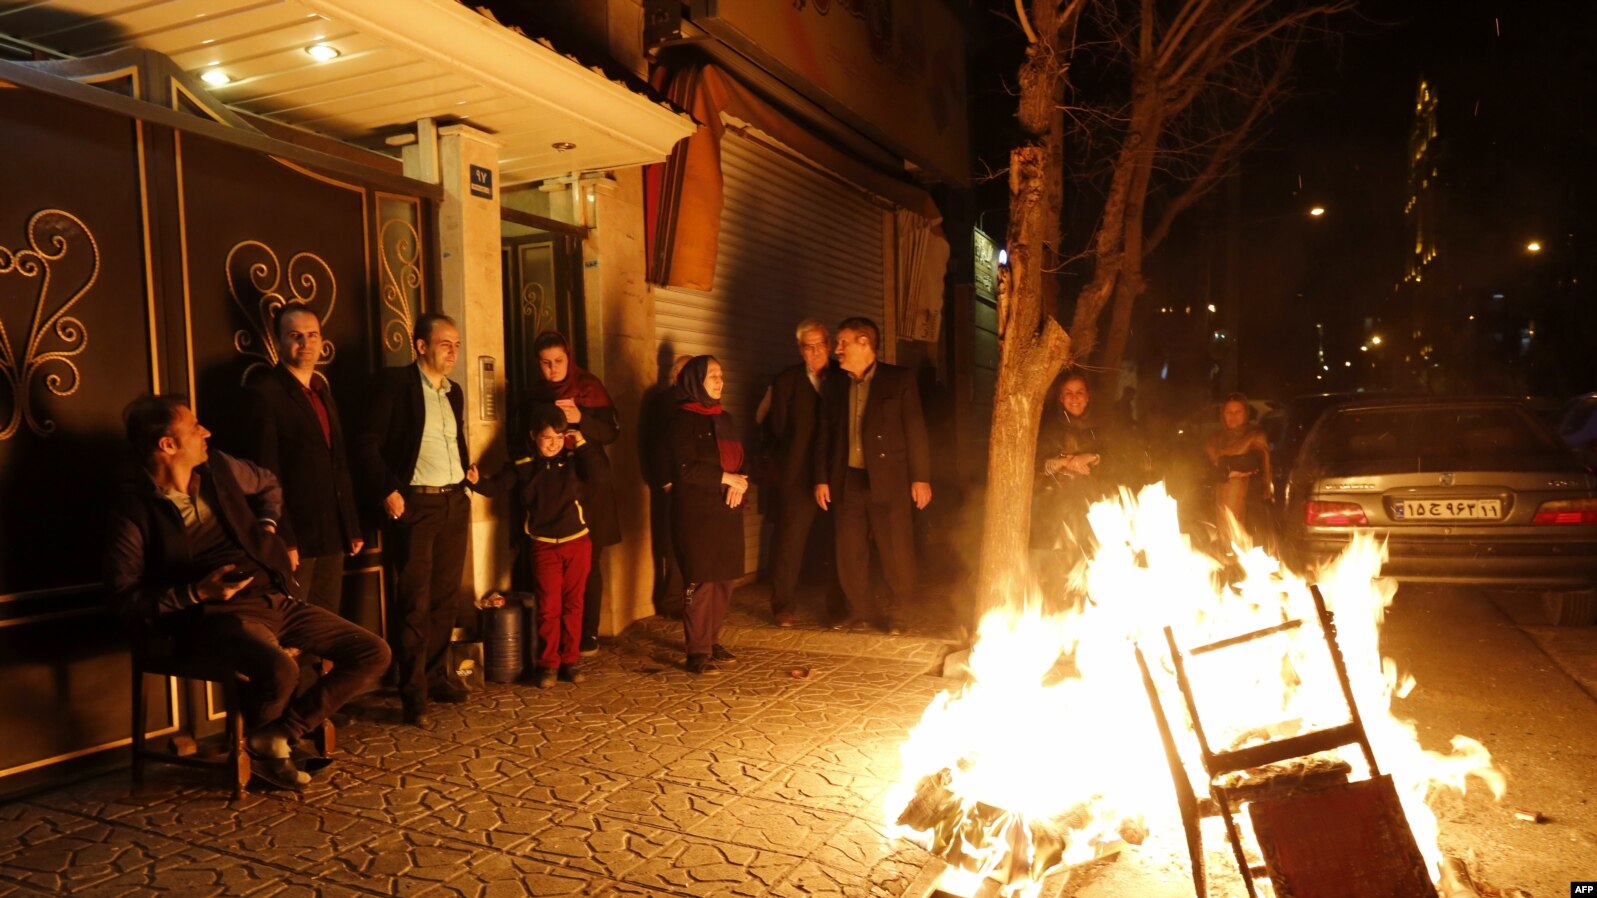 Iranian families light fire outside their houses in Tehran on March 13, 2018 during the Wednesday Fire feast, or Chaharshanbeh Soori, held annually on the last Wednesday eve before the Spring holiday of Noruz. The Iranian new year that begins on March 20